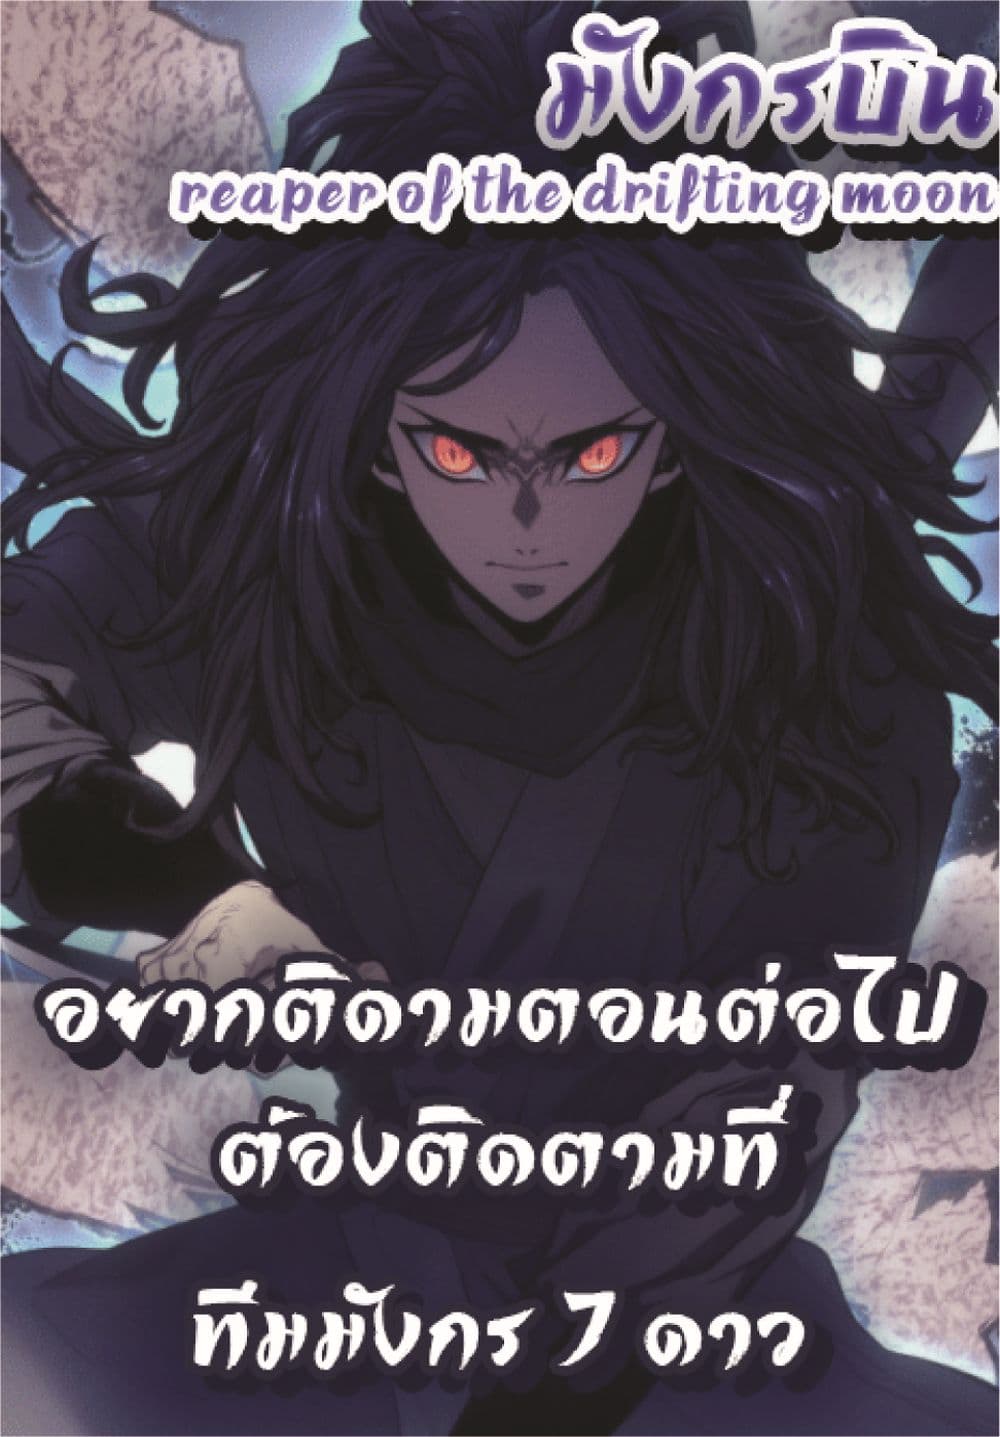 Reaper of the Drifting Moon 4-4